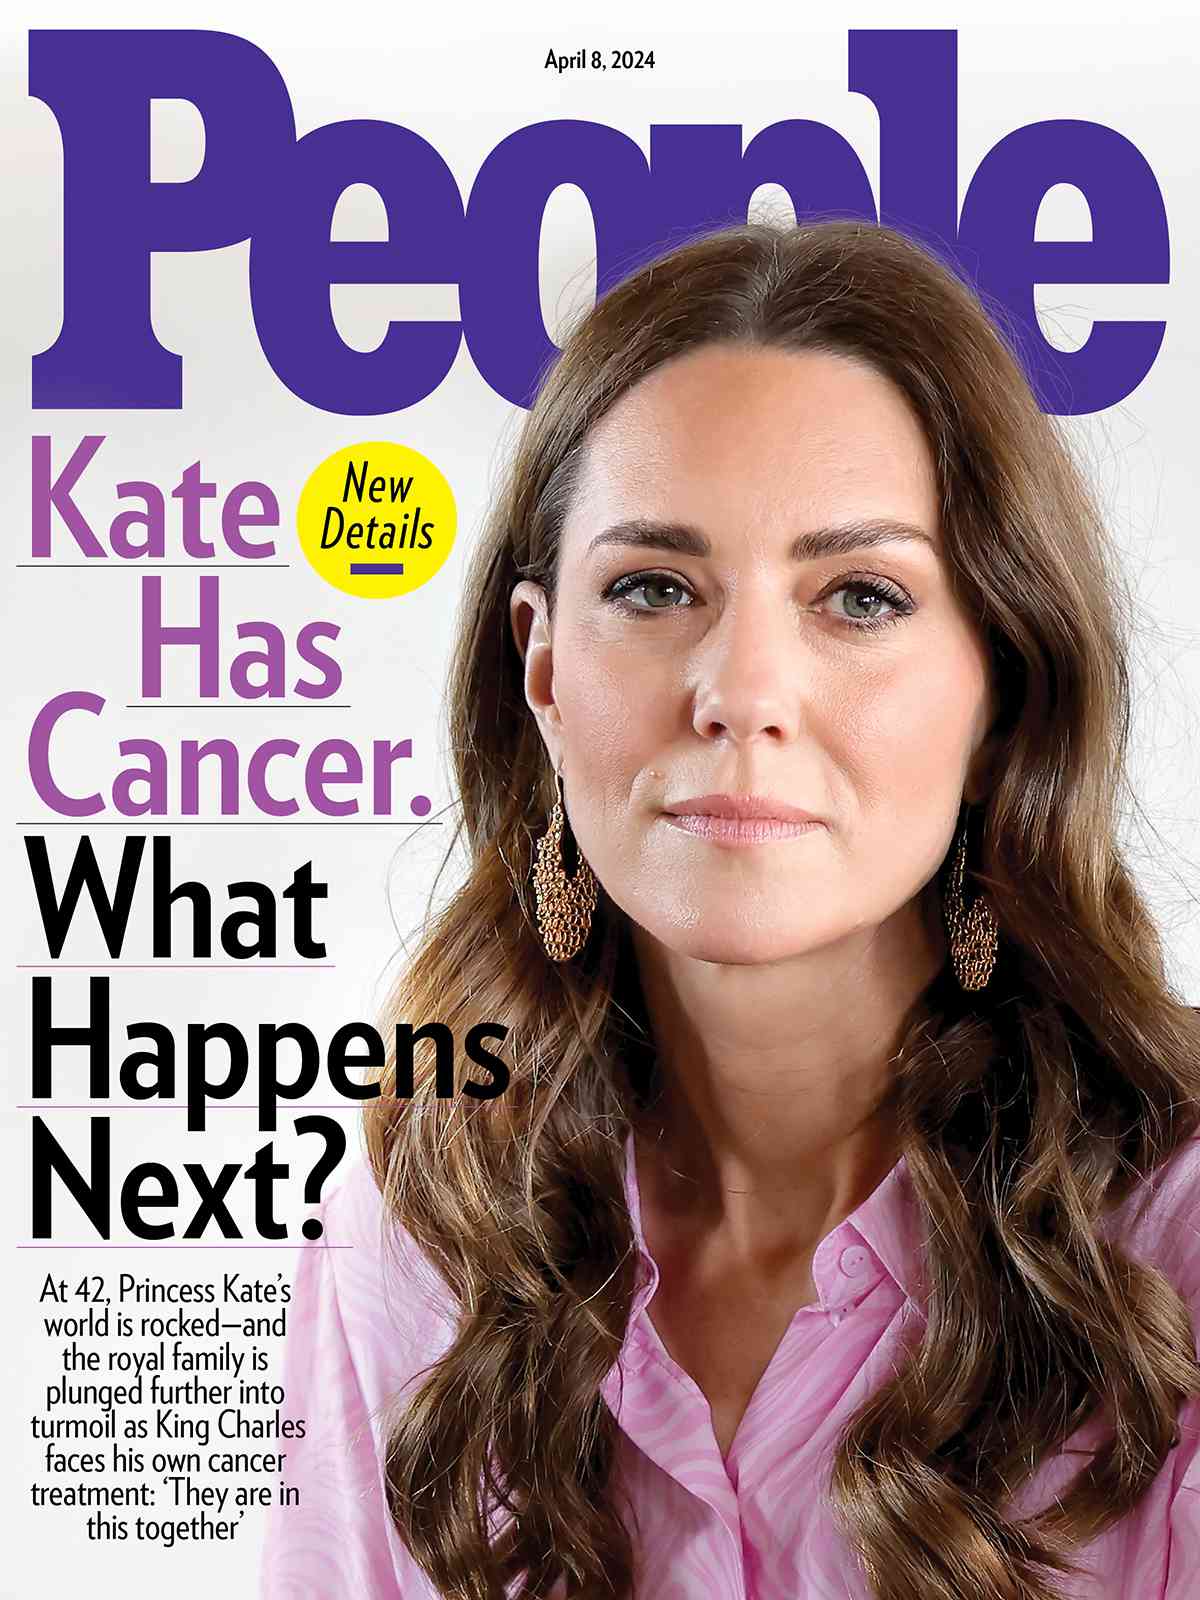 Kate Middleton's Cancer Rocks Monarchy, What Happens Next? (Exclusive)